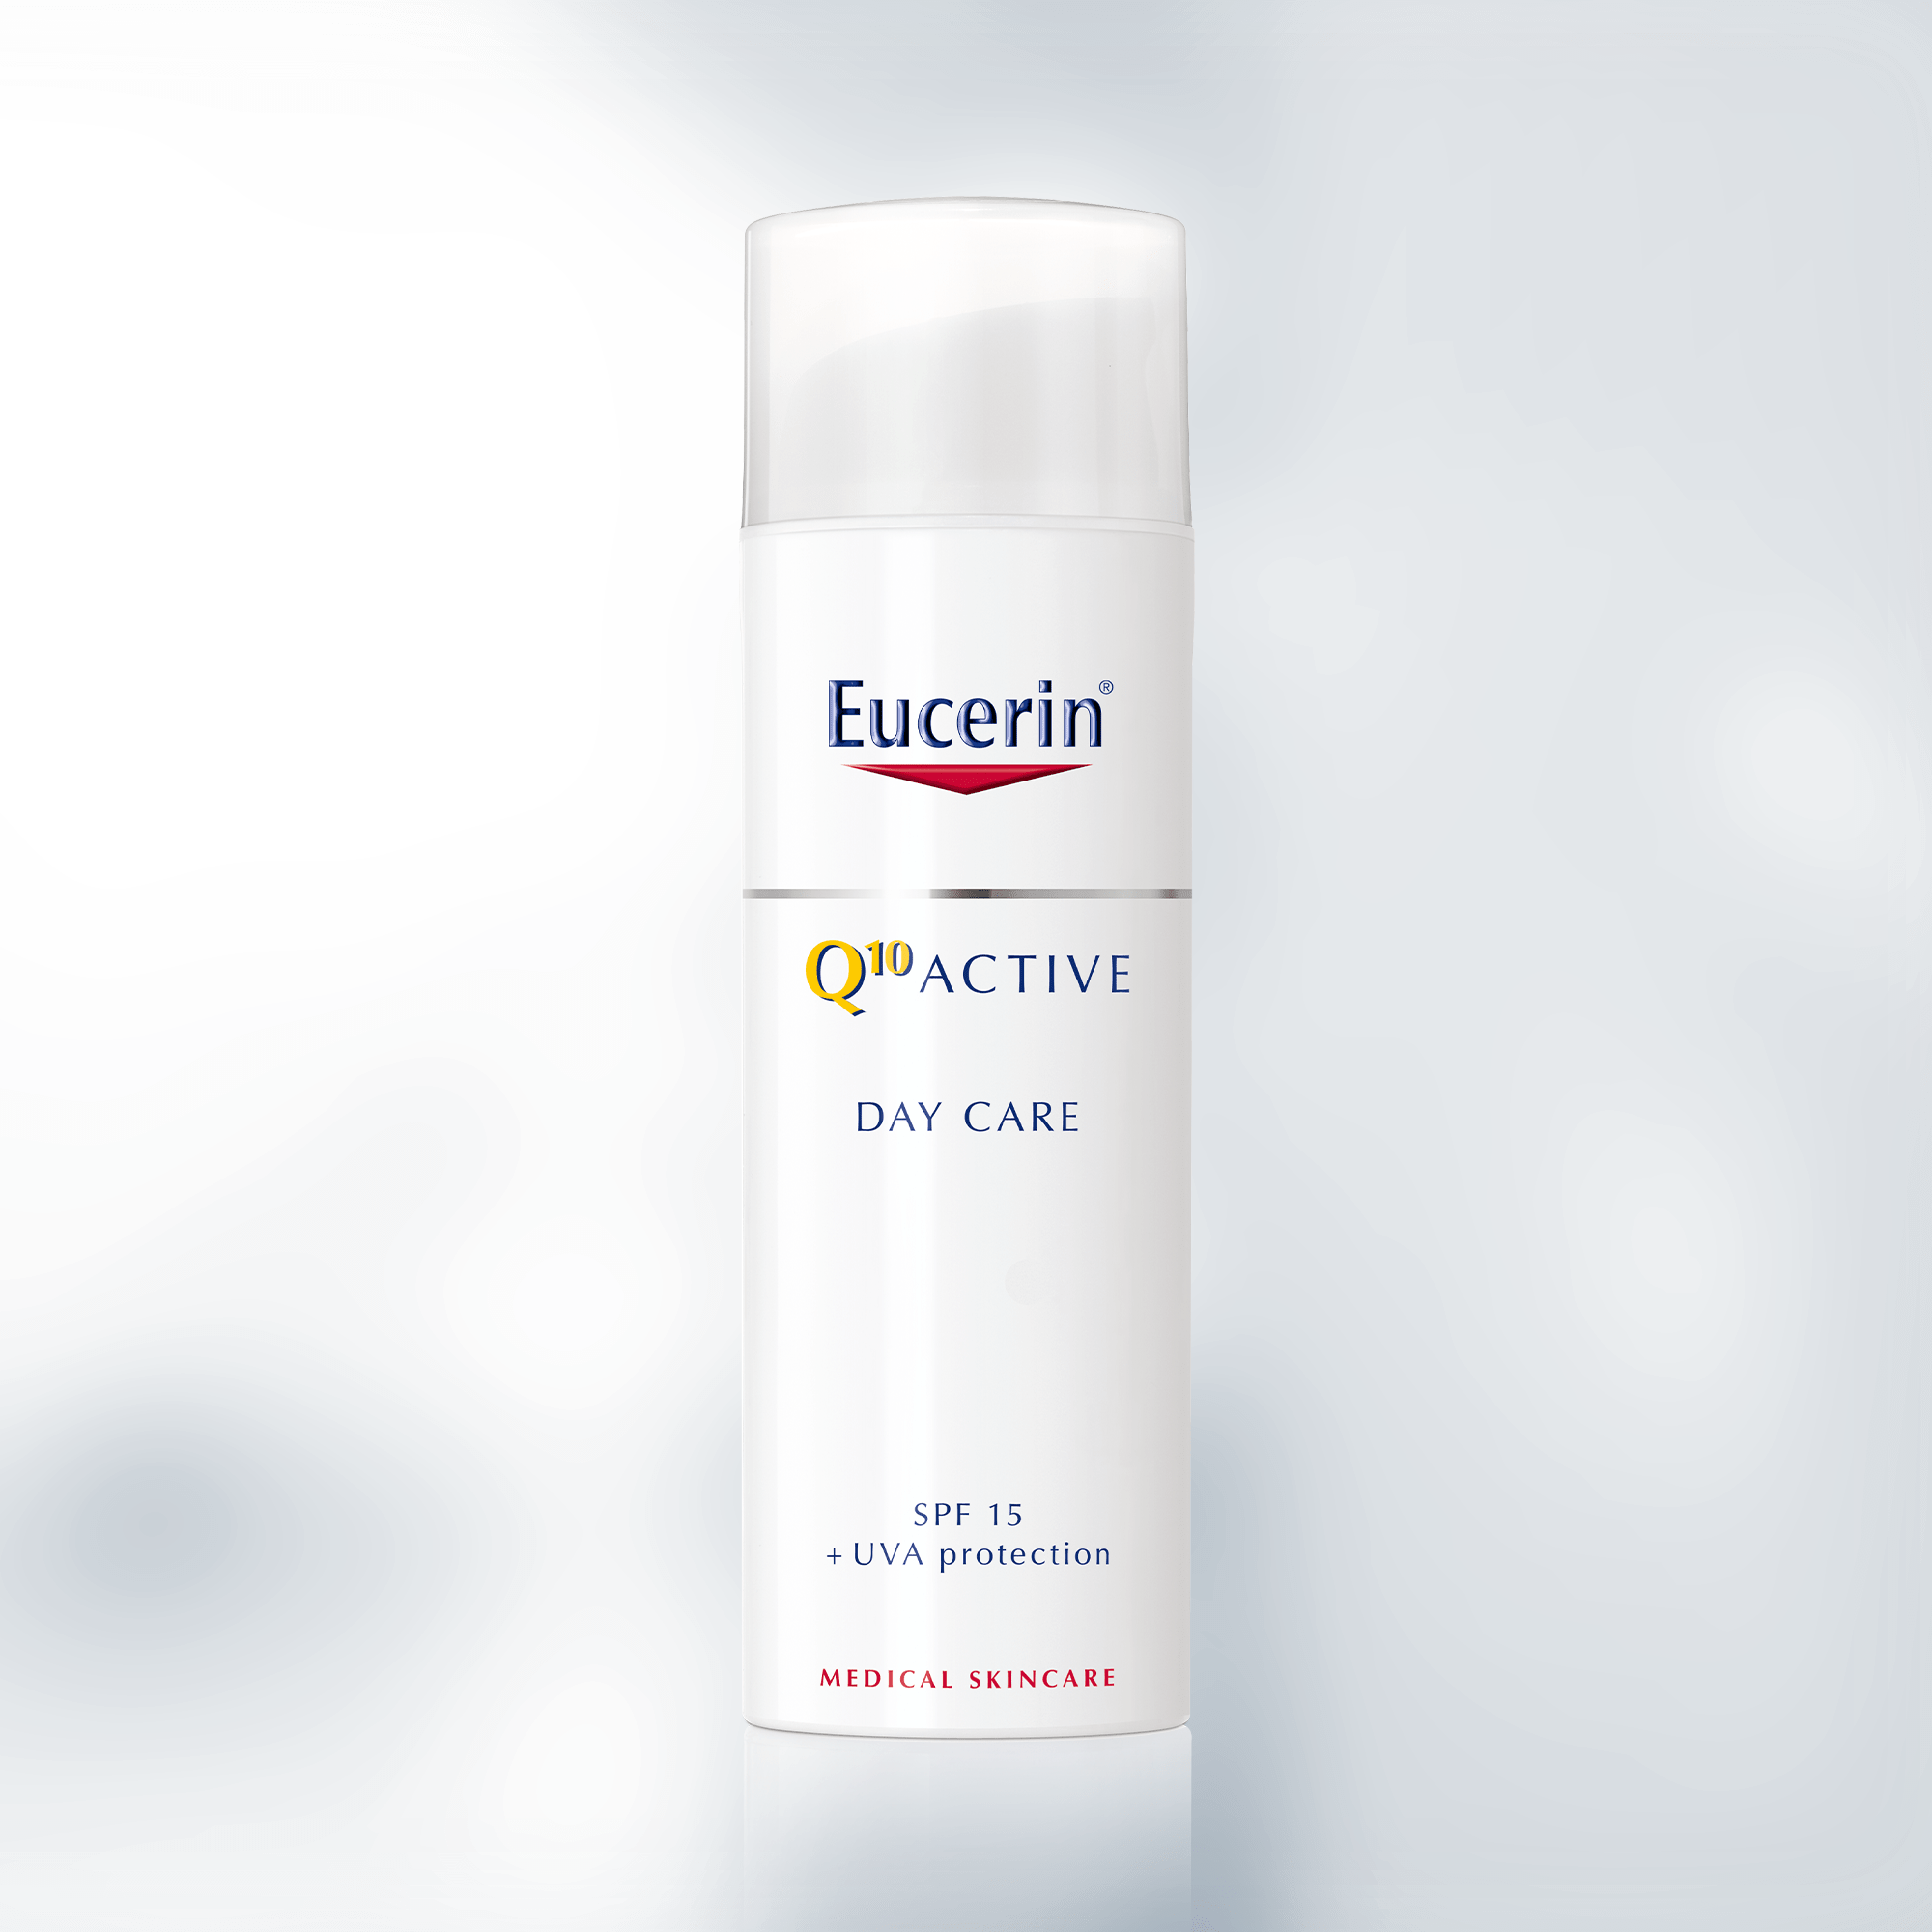 Eucerin Q10 ACTIVE Day Cream for normal to combination skin